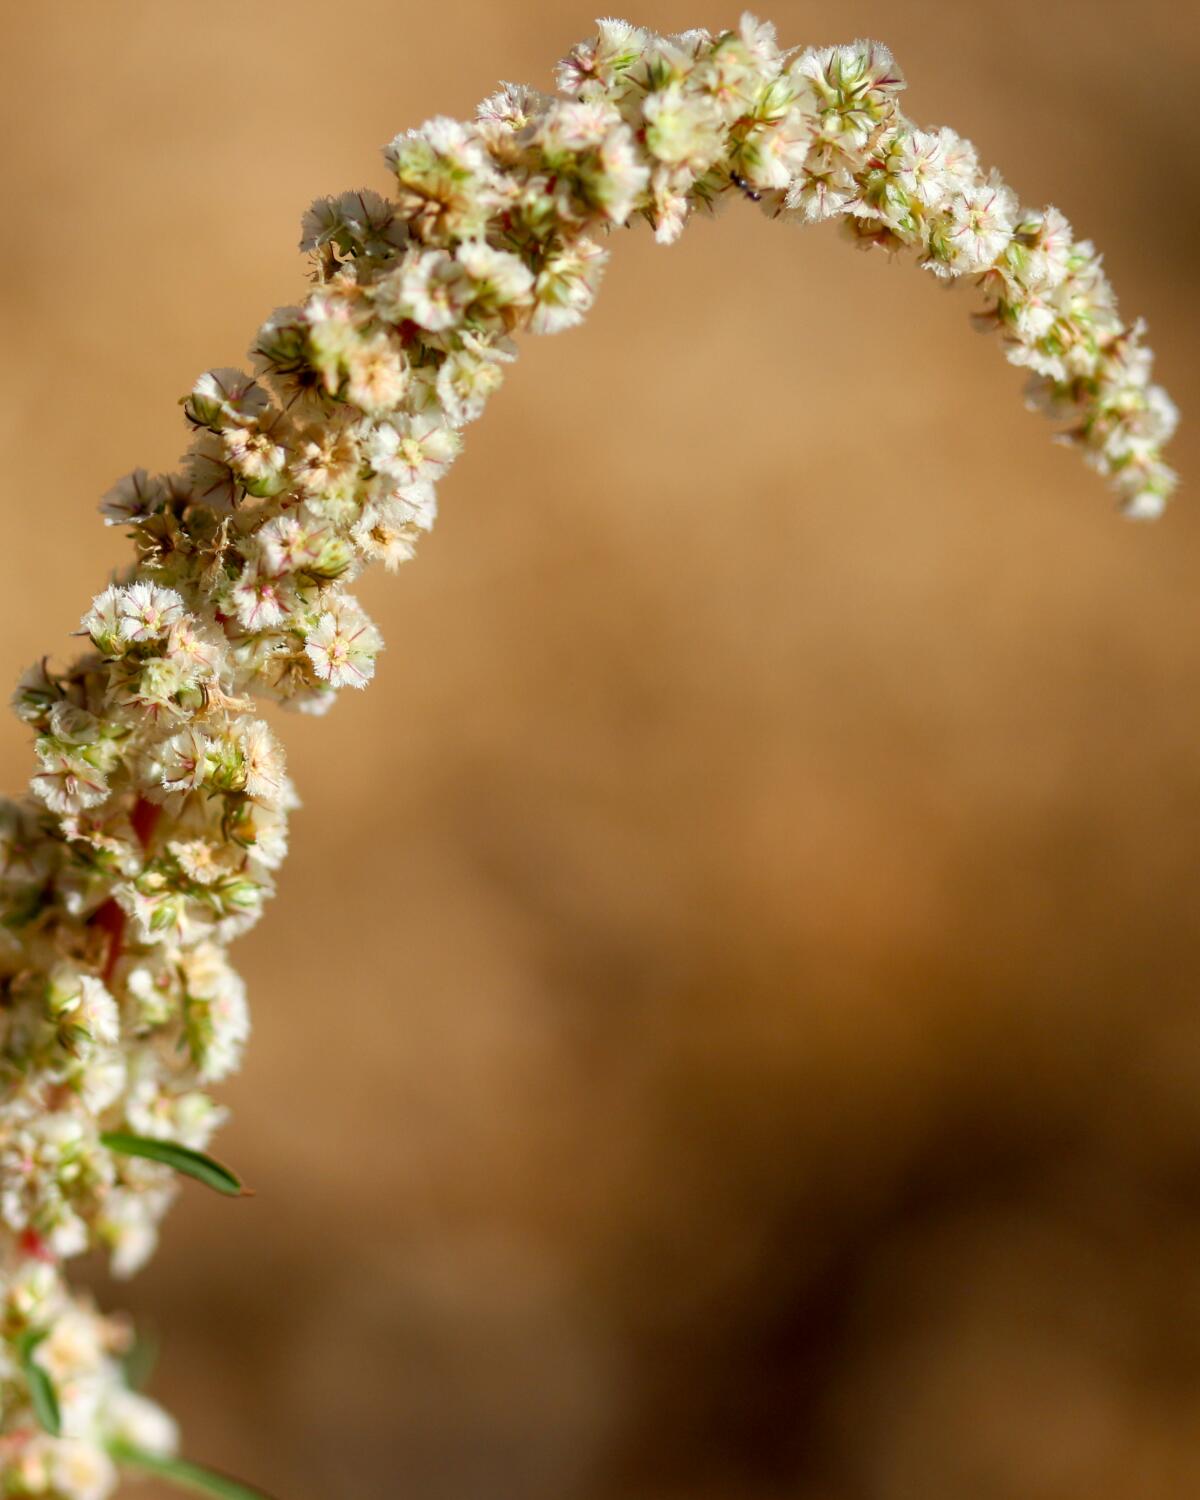 A showy arcing bloom from a fringed amaranth (Amaranthus fimbriatus).